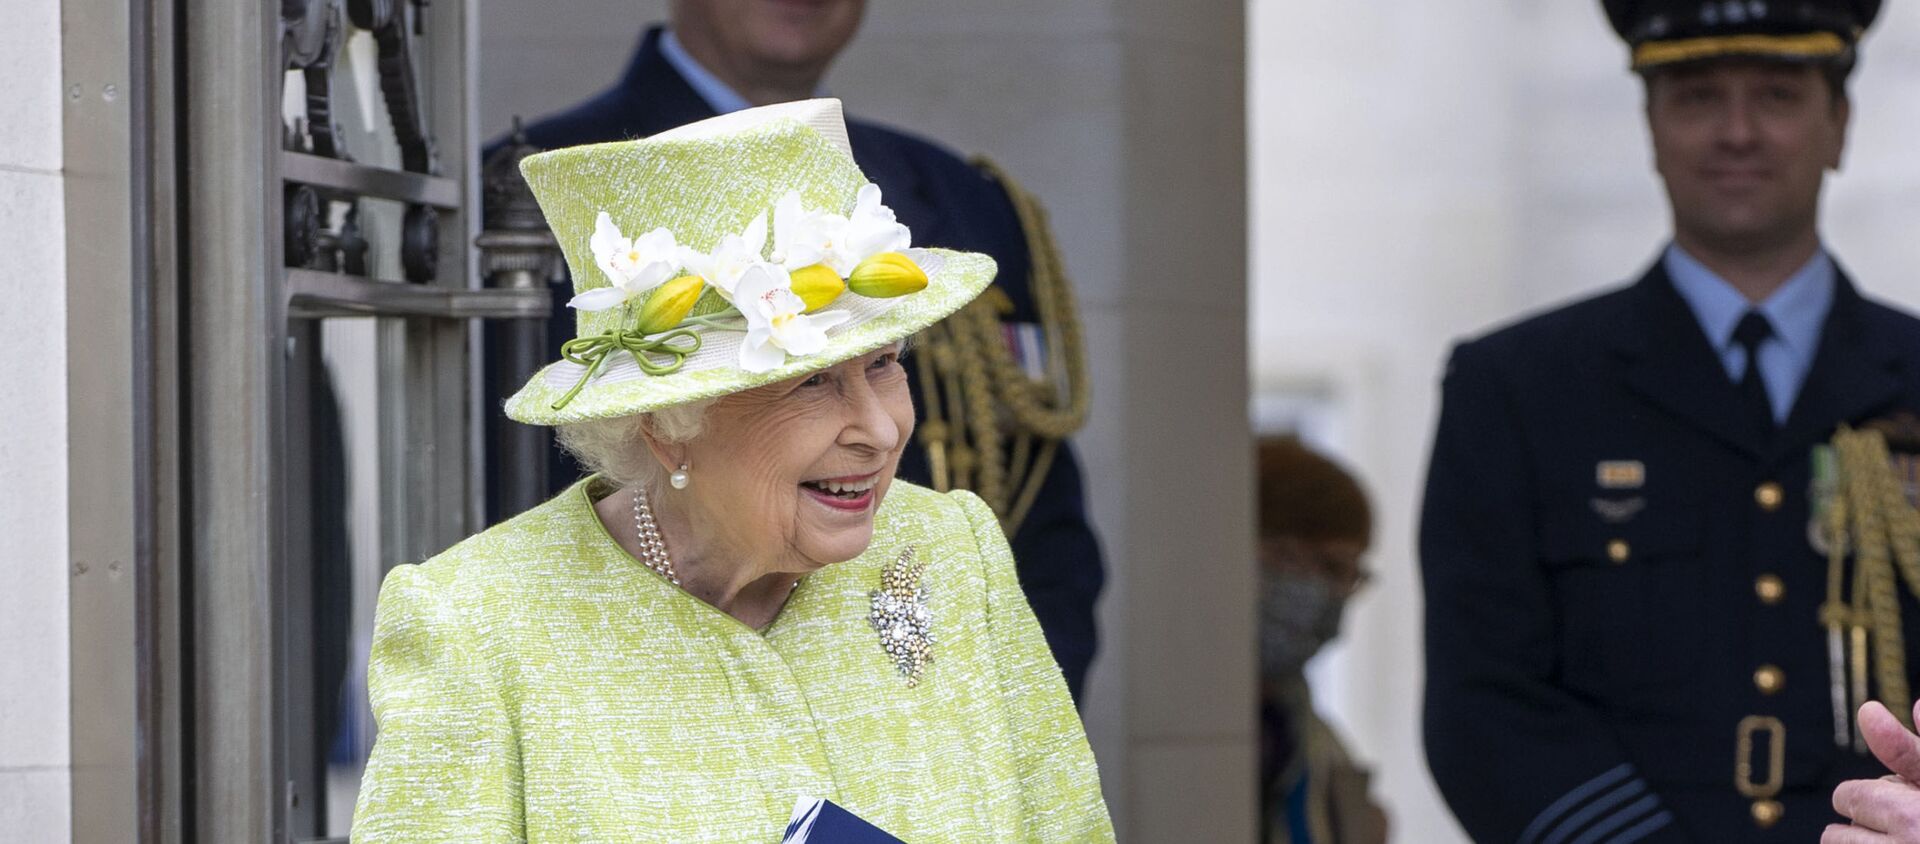 Britain's Queen Elizabeth II during a visit to the CWGC, the Commonwealth War Graves Commission Air Forces Memorial to attend a service to mark the Centenary of the Royal Australian Air Force, in Runnymede, England, 31 March 2021 - Sputnik International, 1920, 14.04.2021